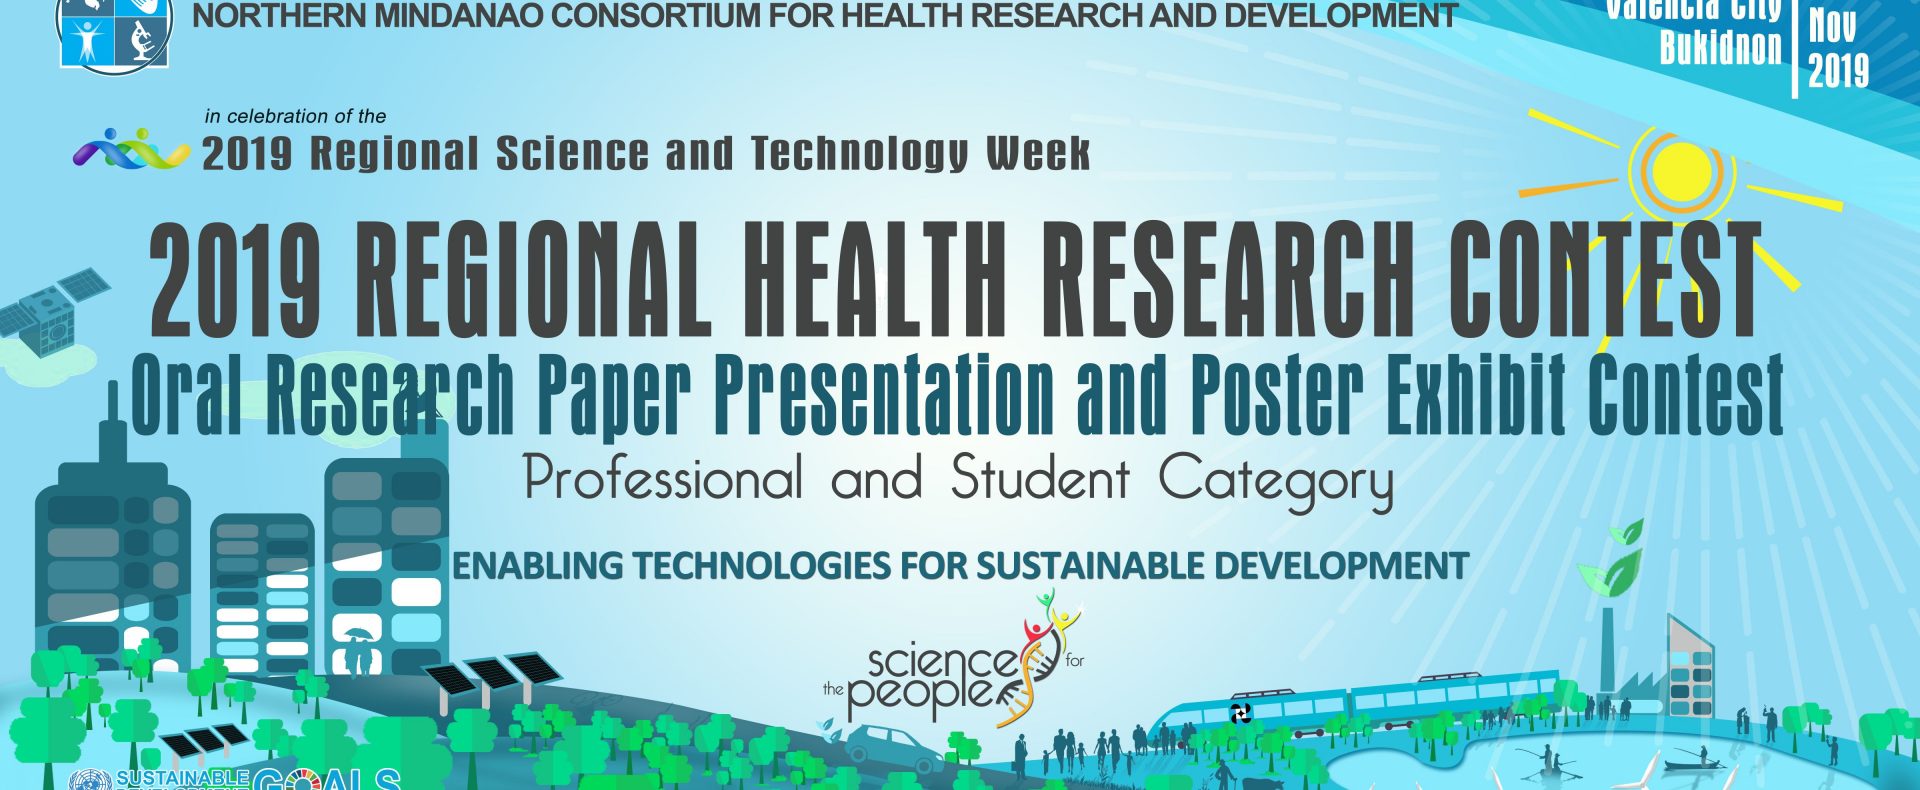 2019-NORMINCOHRD-REGIONAL-HEALTH-RESEARCH-CONTEST